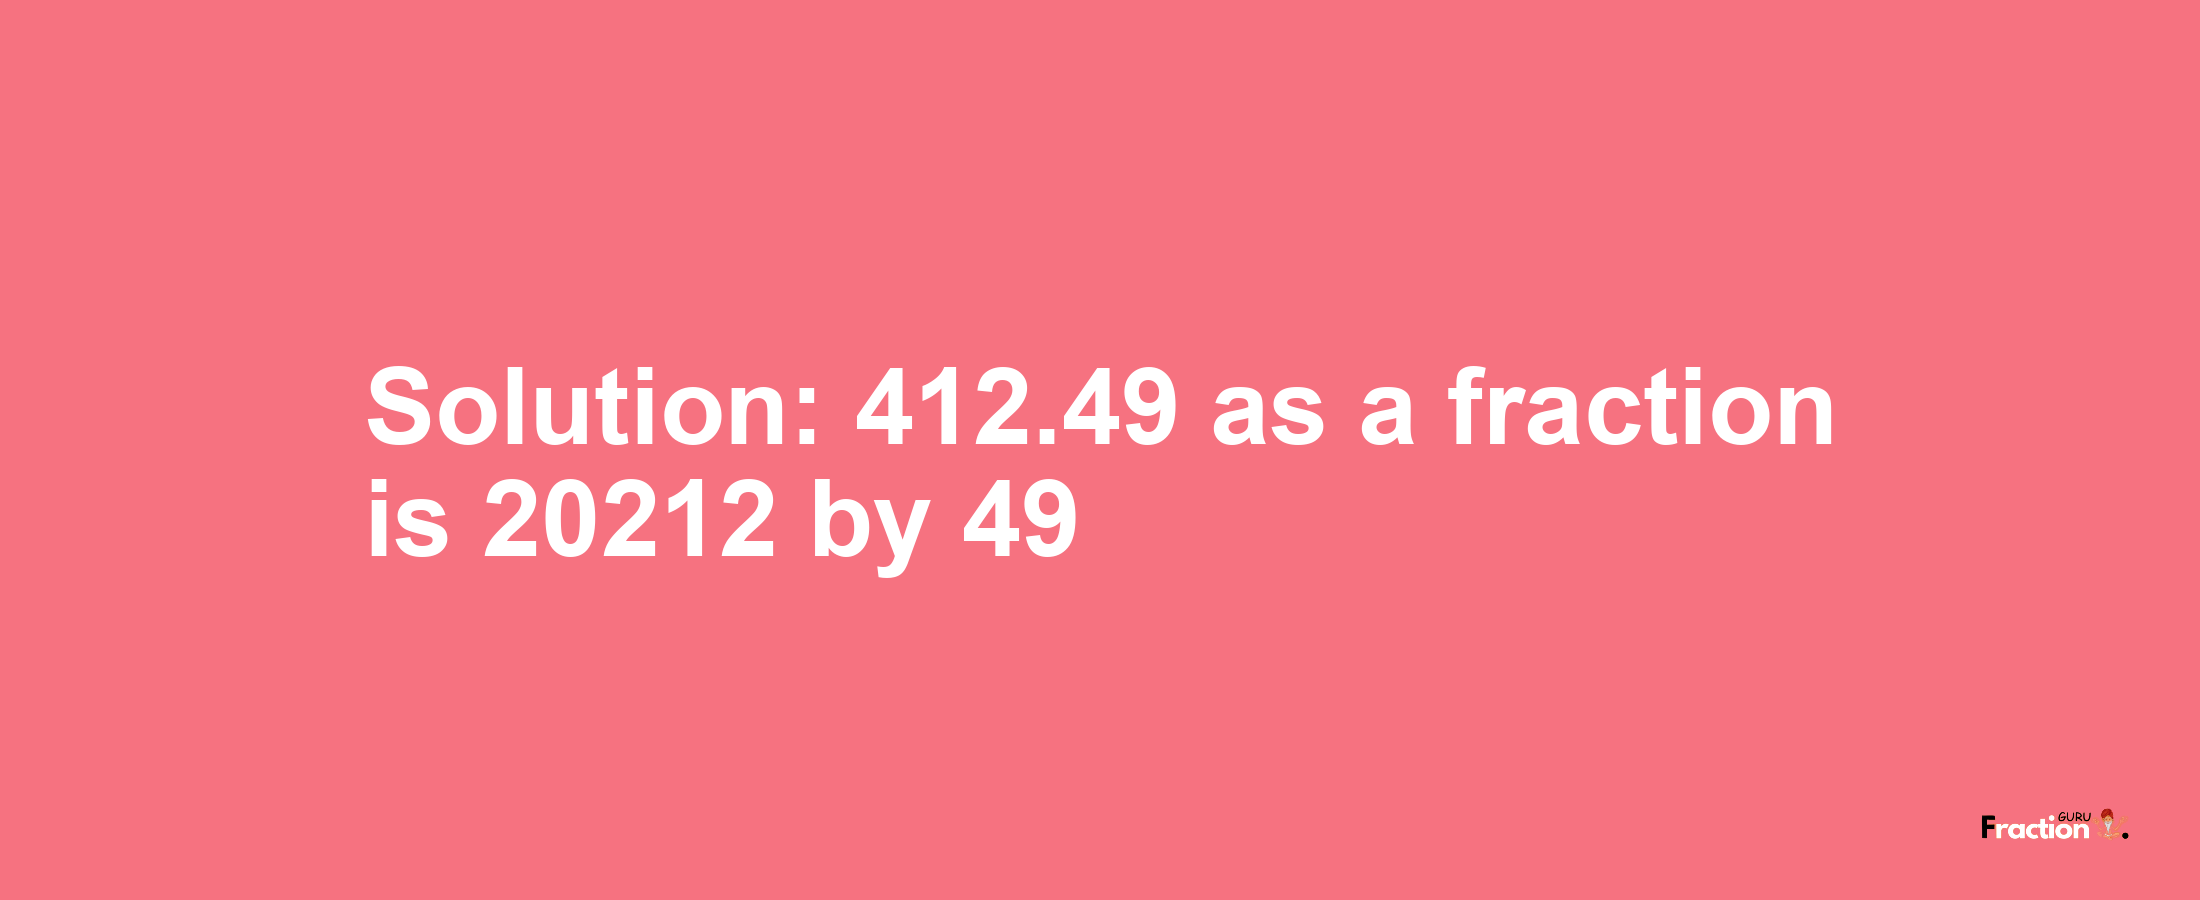 Solution:412.49 as a fraction is 20212/49